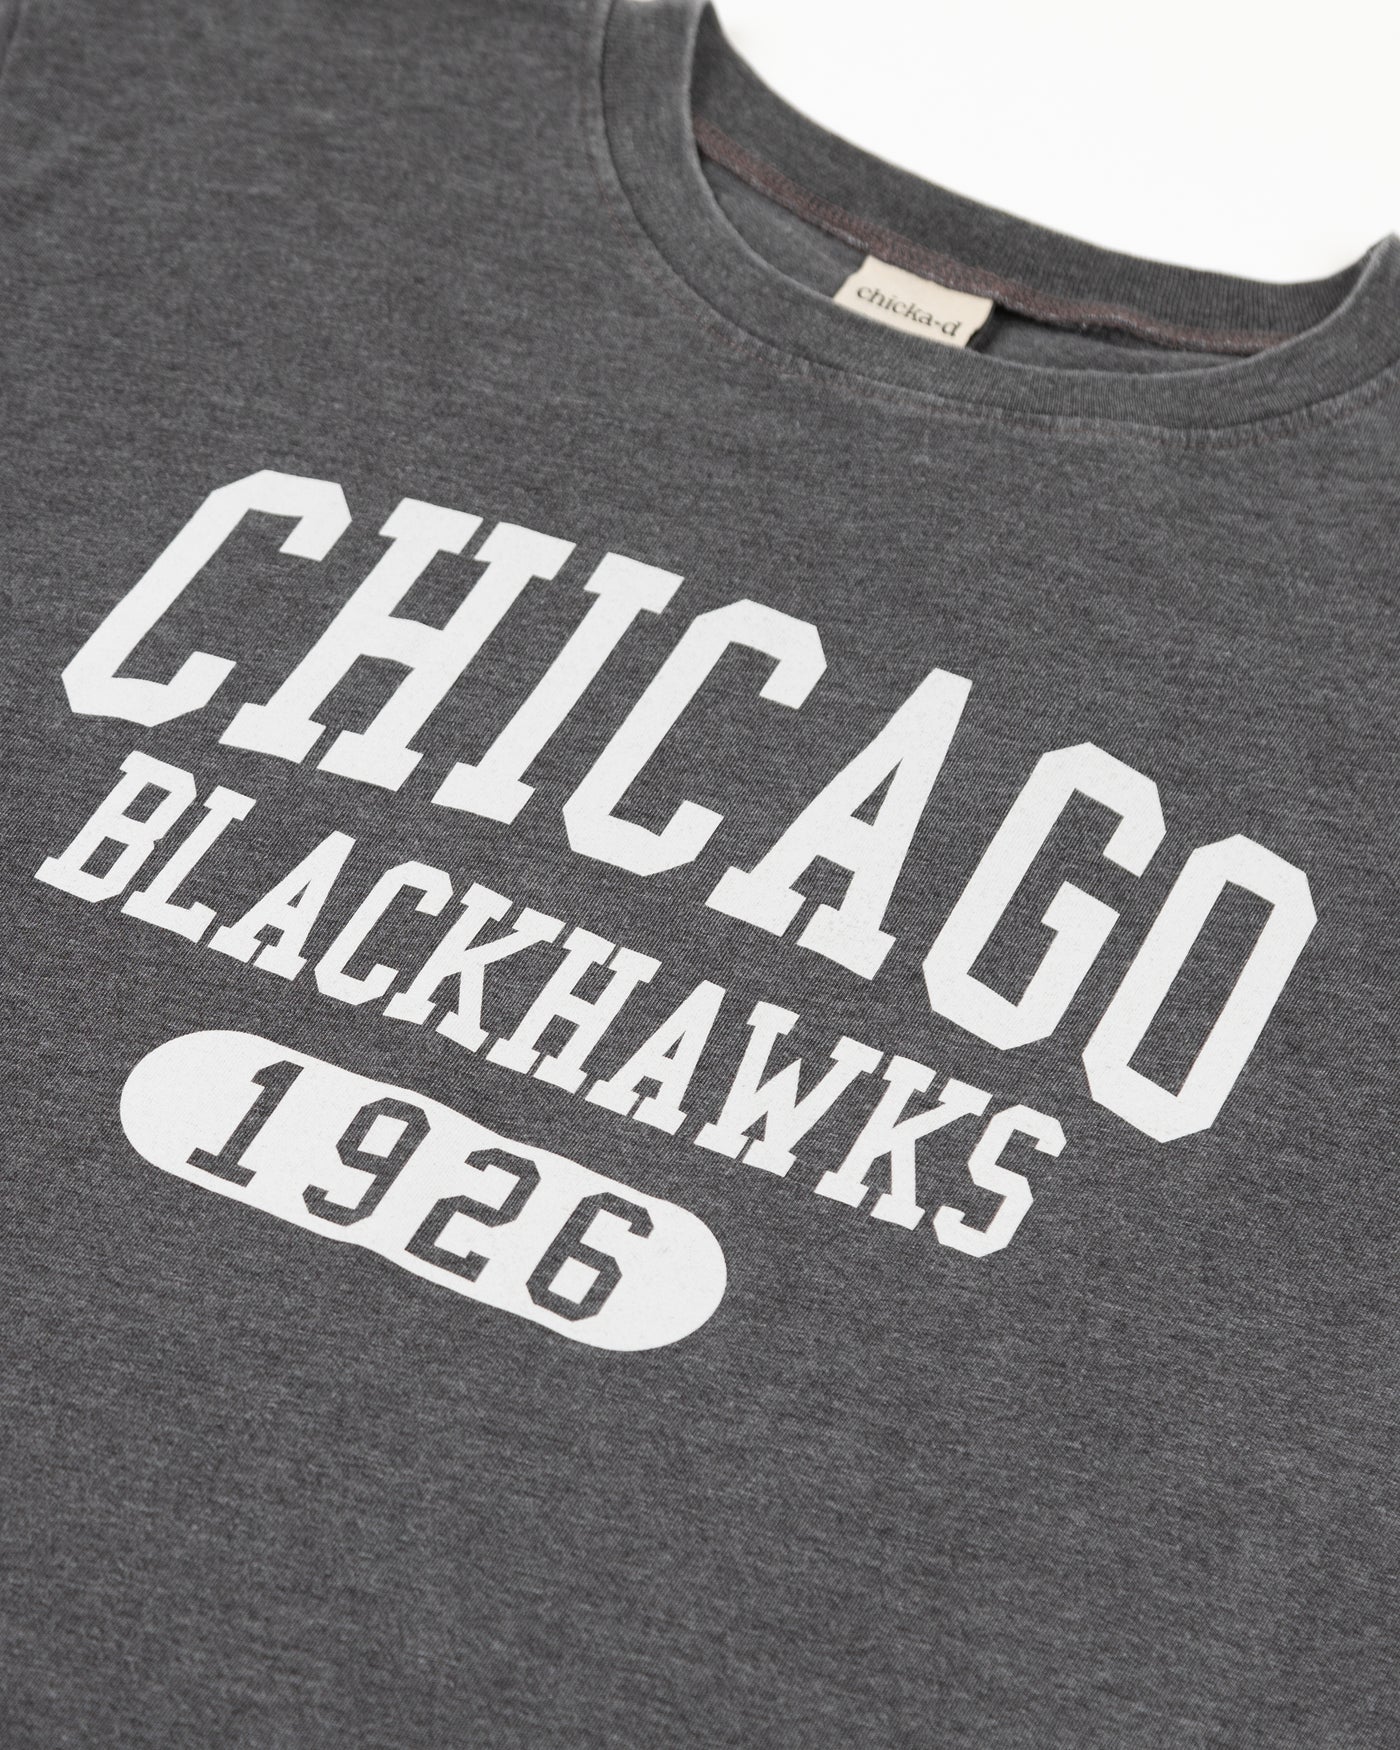 black chicka-d oversized women's tee with Chicago Blackhawks wordmark graphic across chest - detail lay flat